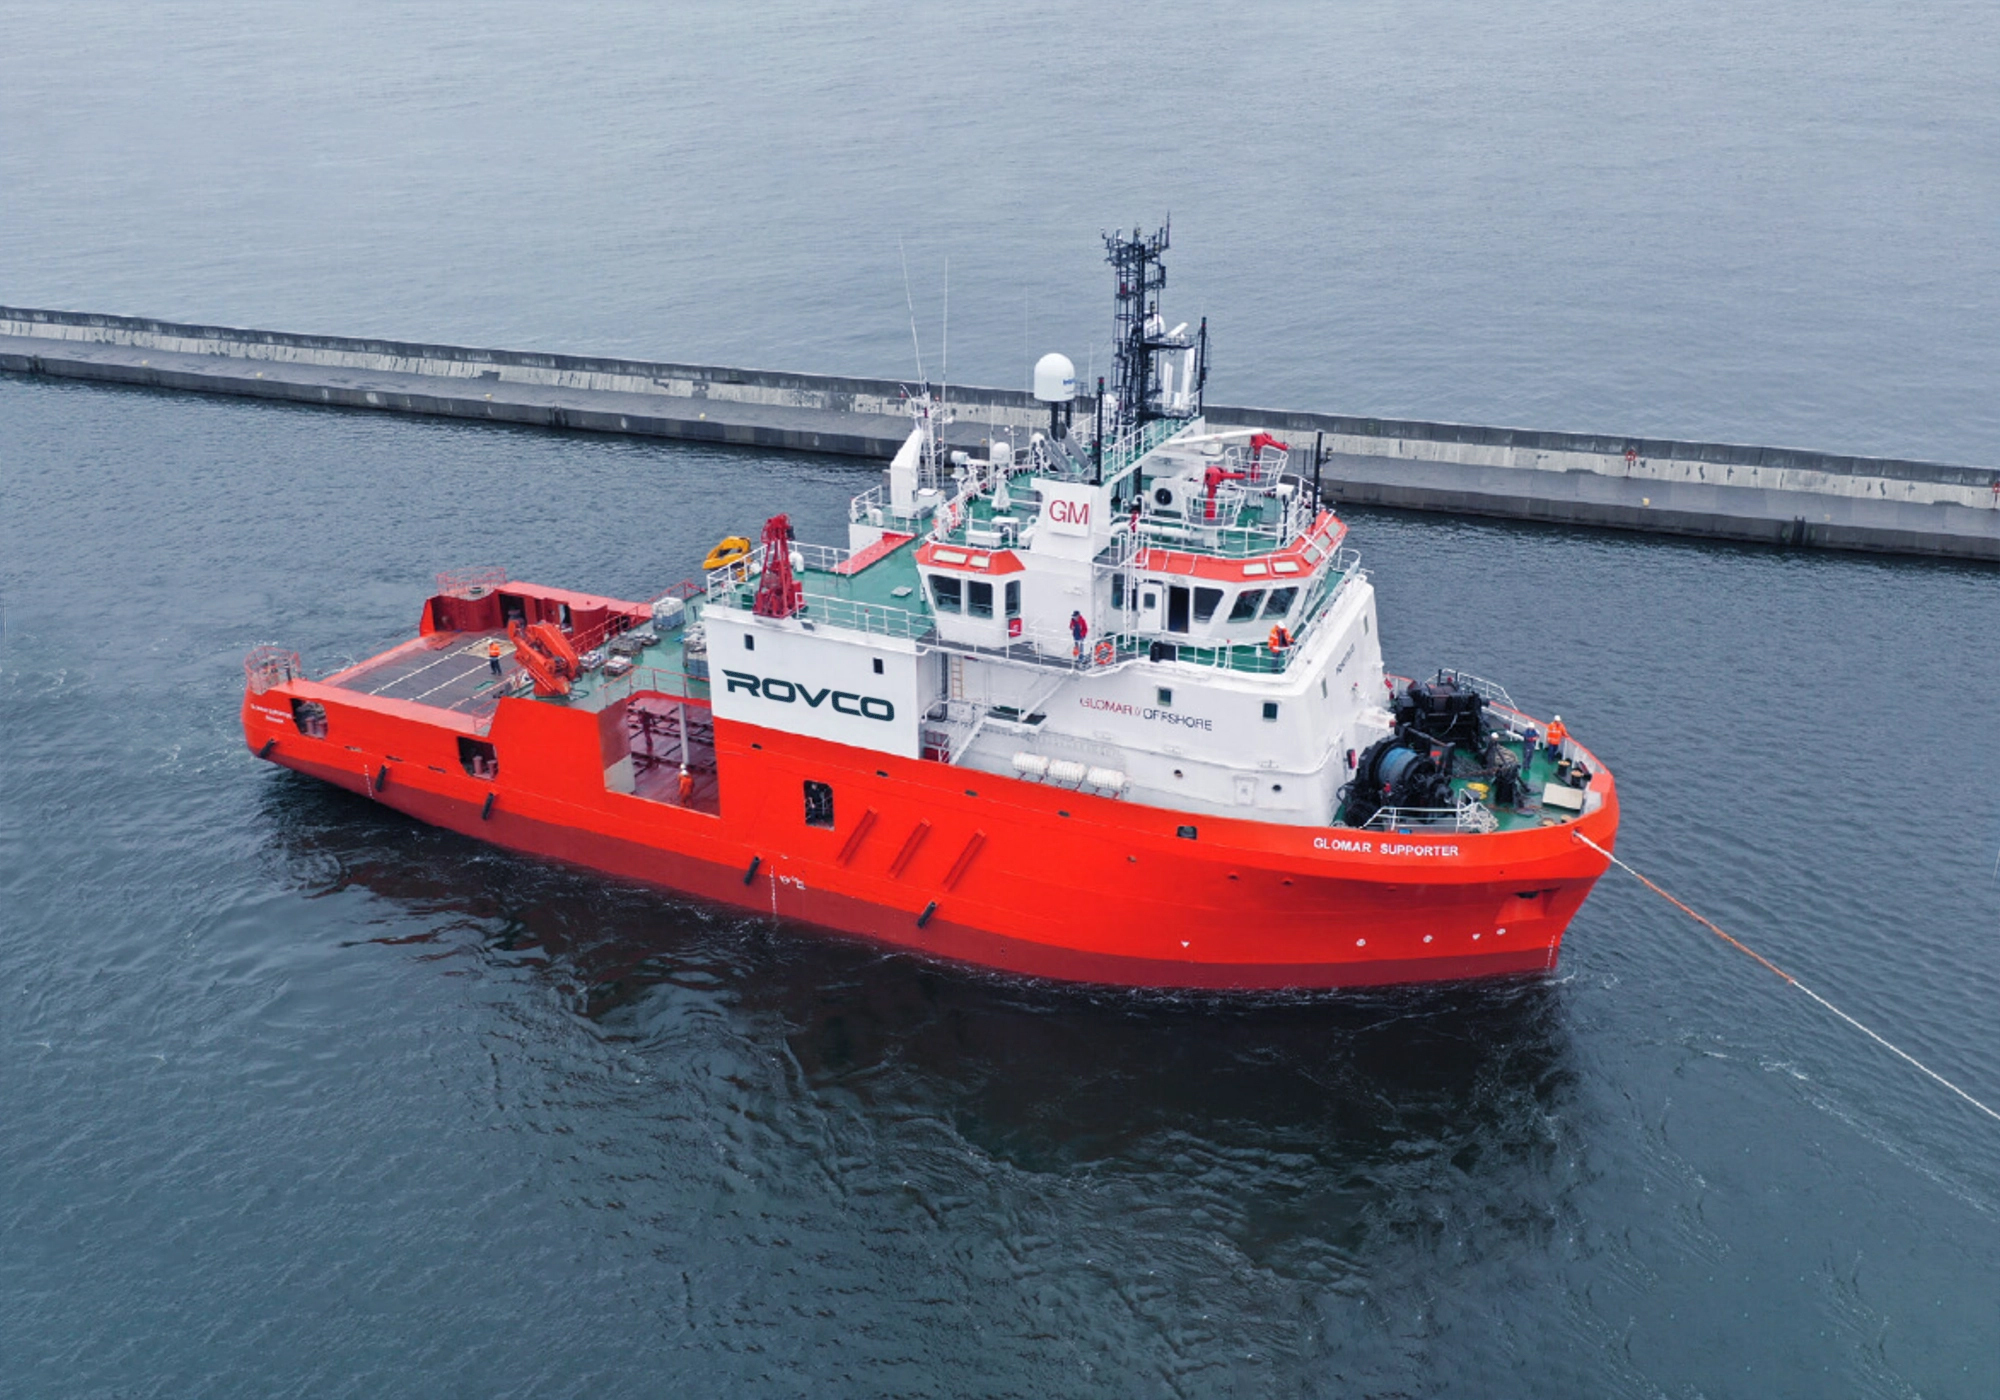 MEMBER NEWS: Rovco signs long-term charter of multipurpose vessel for offshore wind site characterisation projects